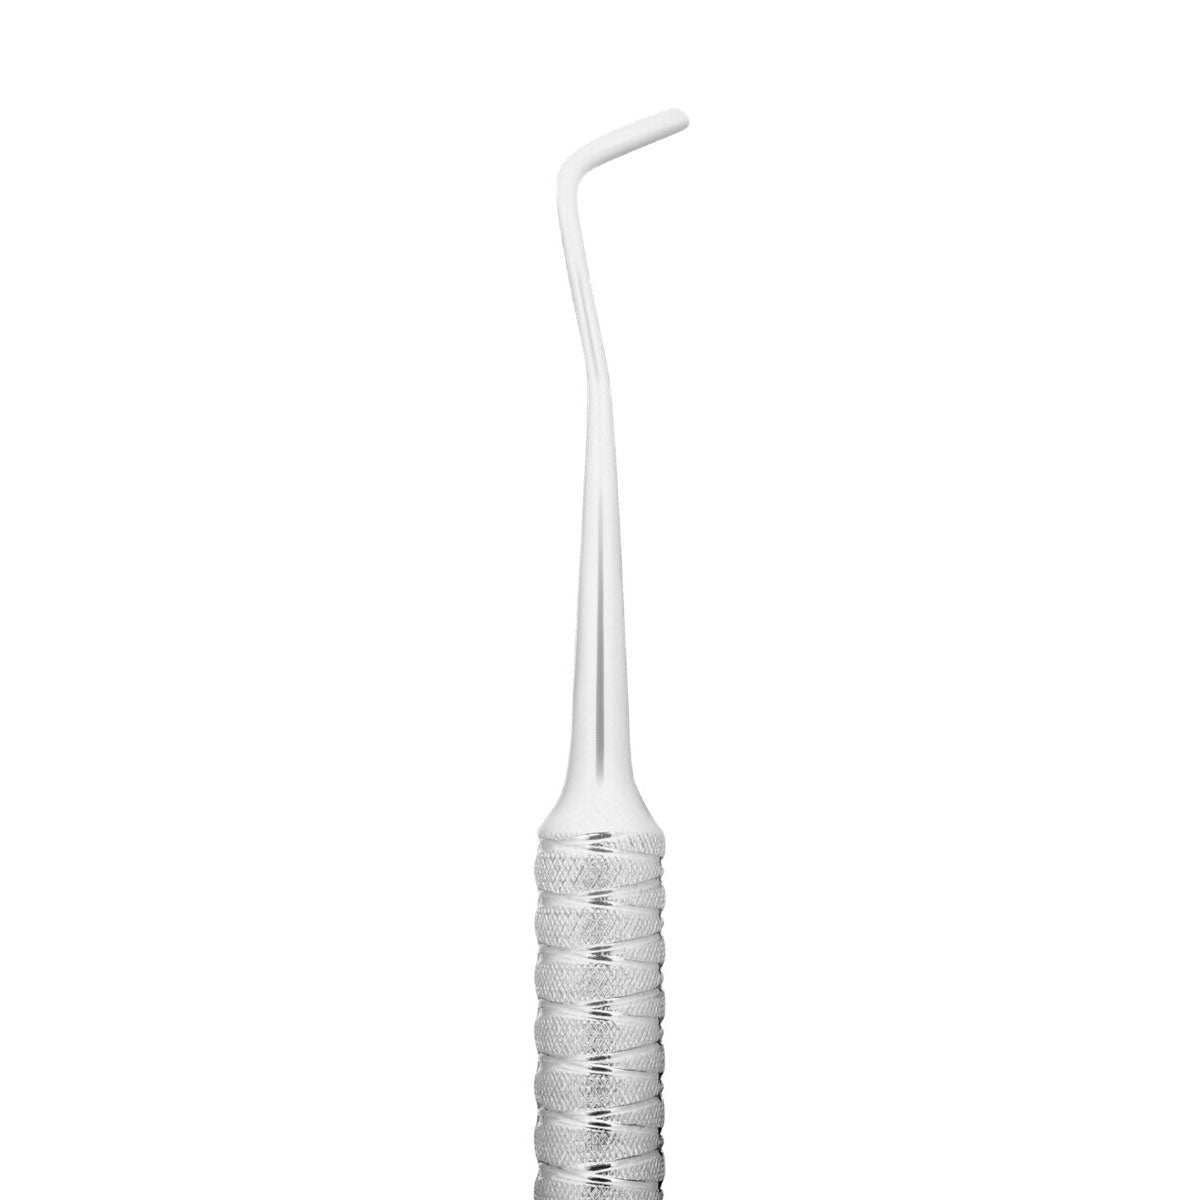    Staleks_Pedicure_tool_EXPERT_20_TYPE_2_double-ended_PE-20_2_3 product view 3